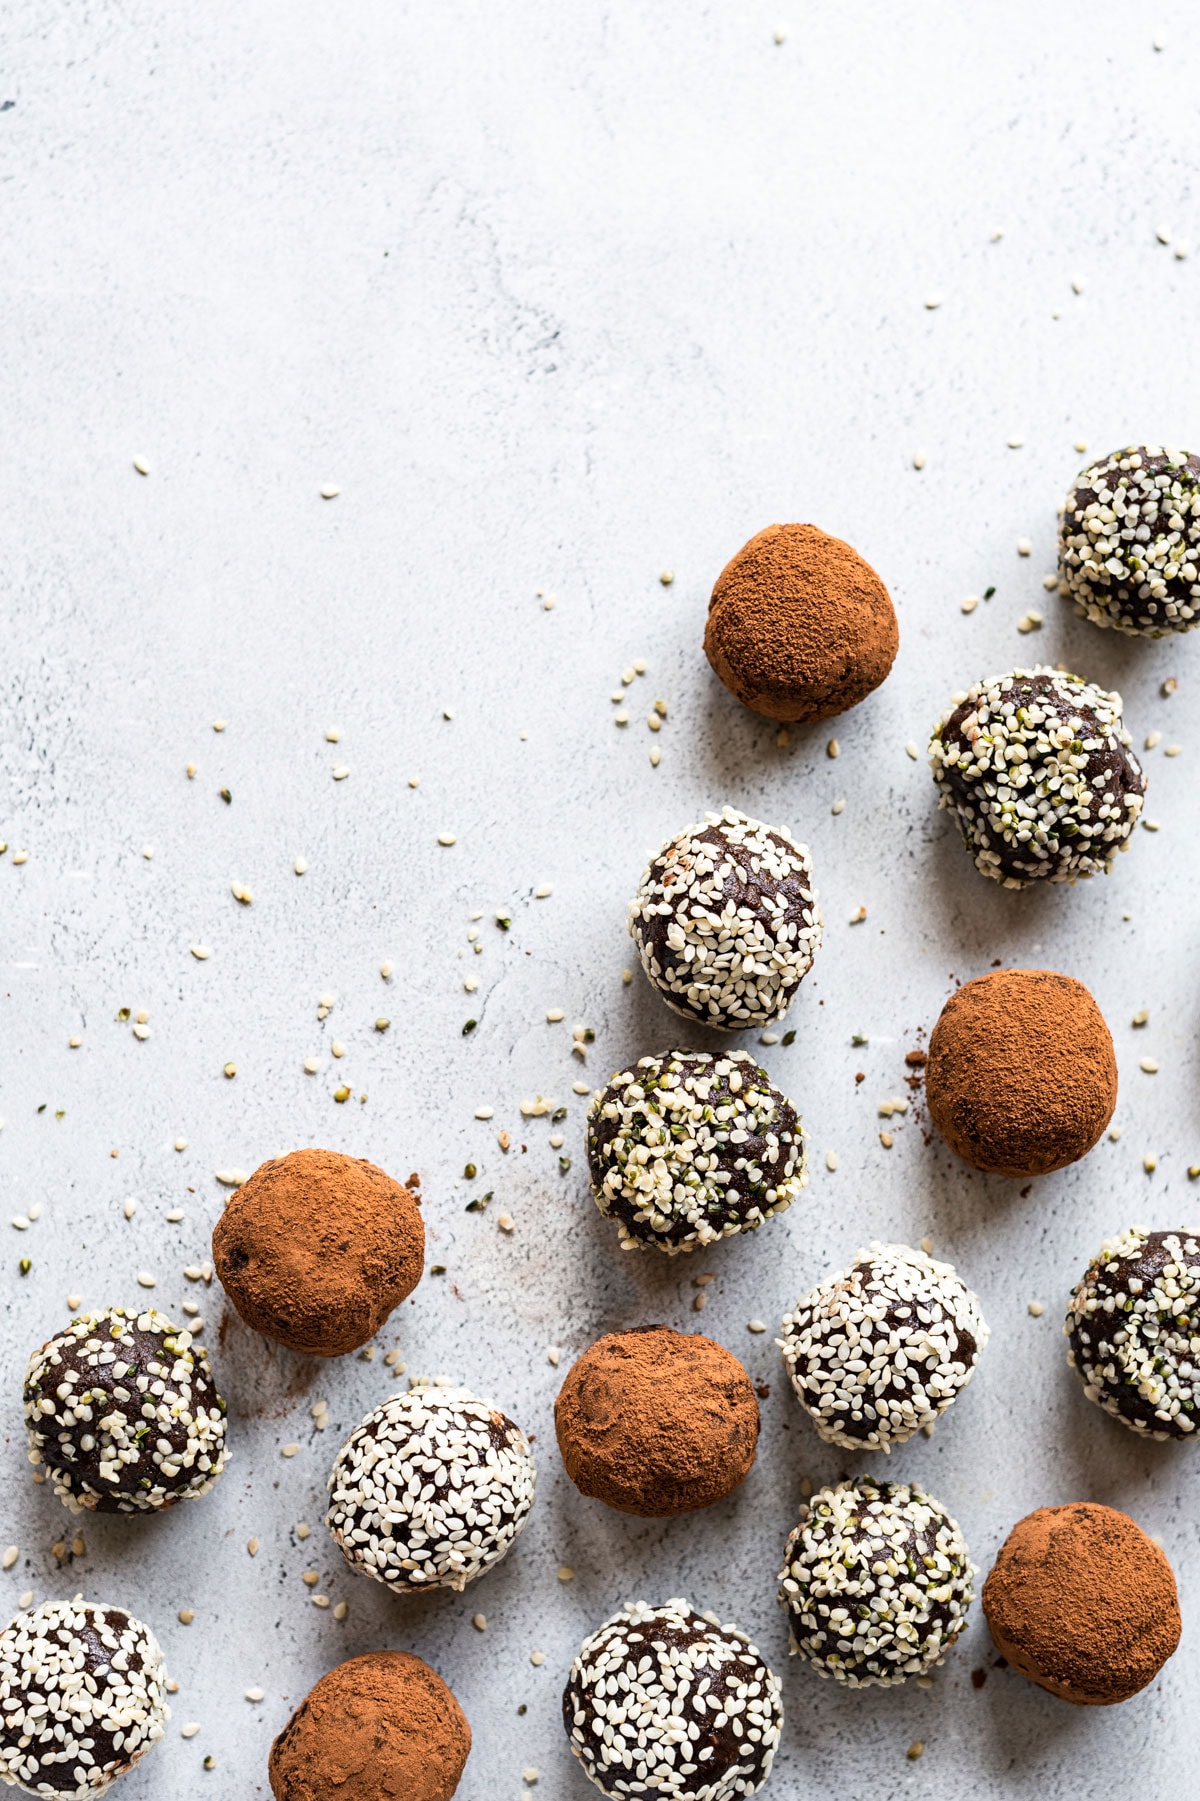 bliss balls coated in cocoa powder and seeds